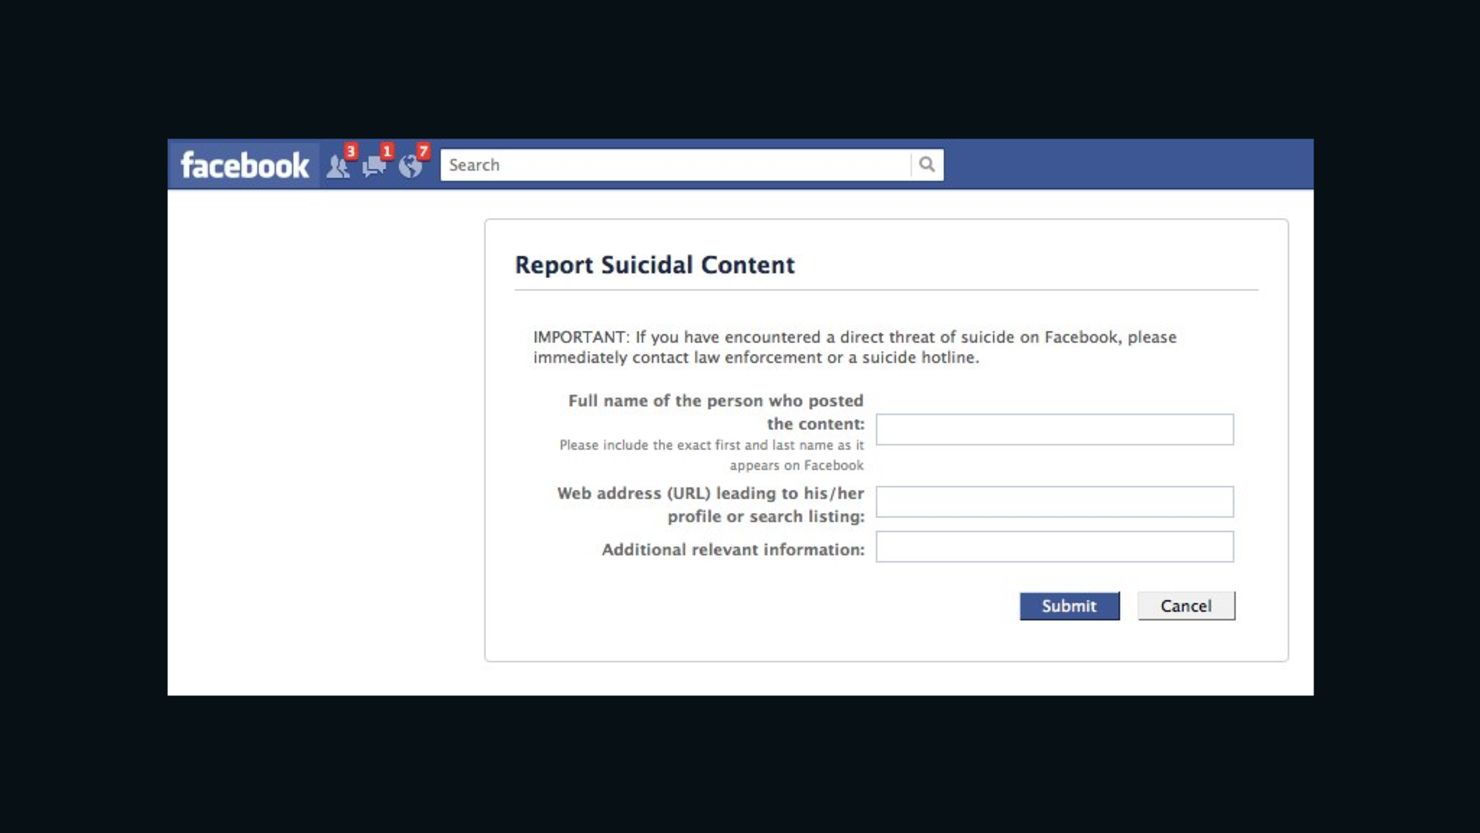 Facebook lets users report friends' potentially suicidal posts in order to refer them to help.